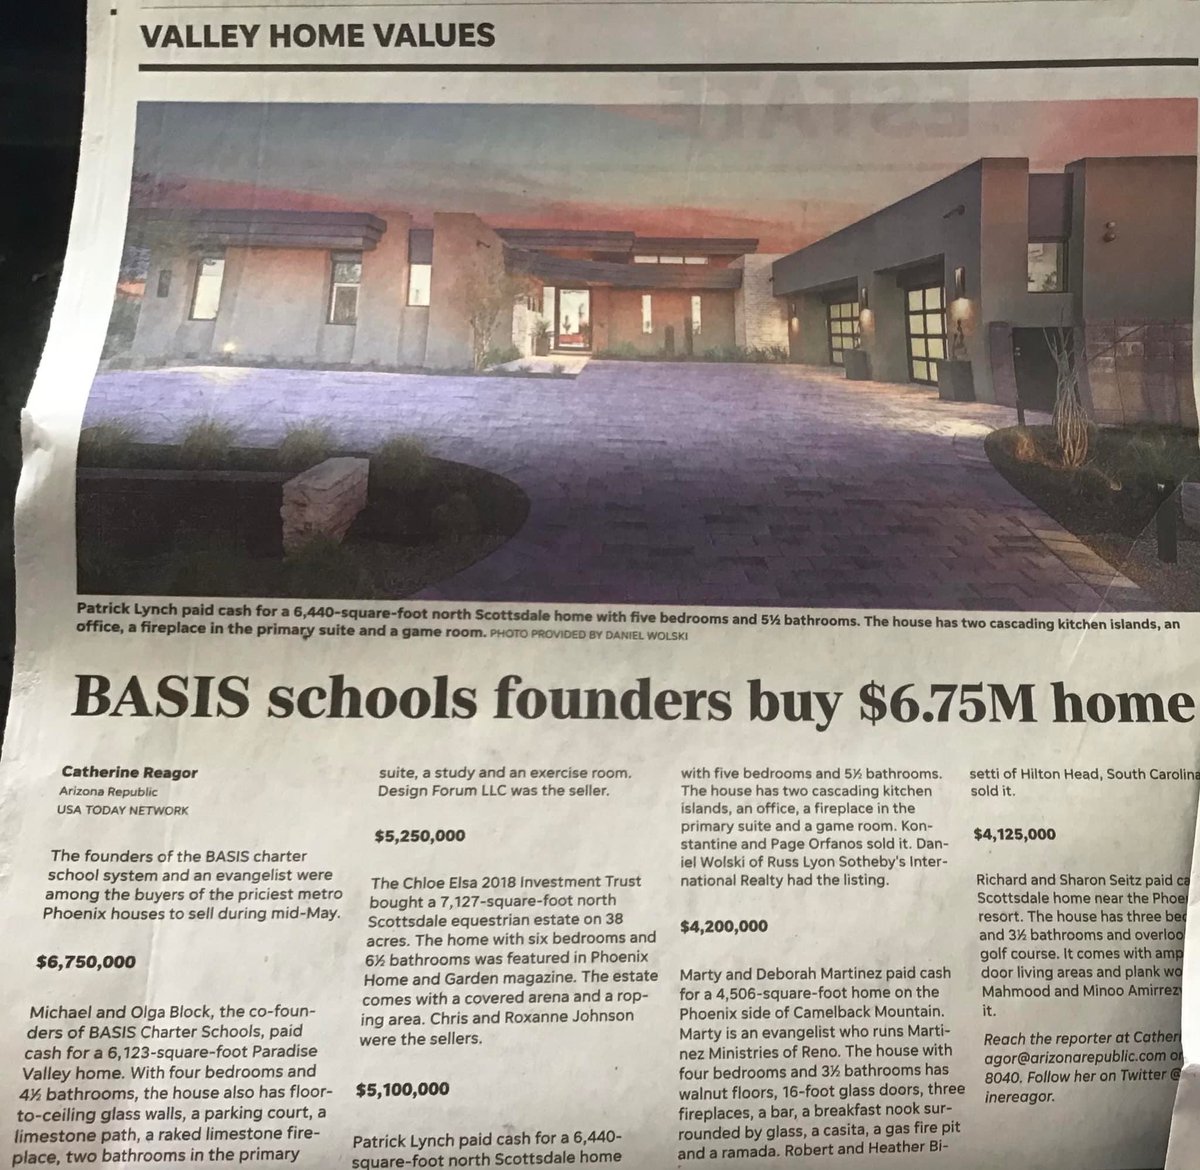 While charter school founders are paying cash for a luxury home with Arizona’s public education funding, teachers are struggling to afford rent.